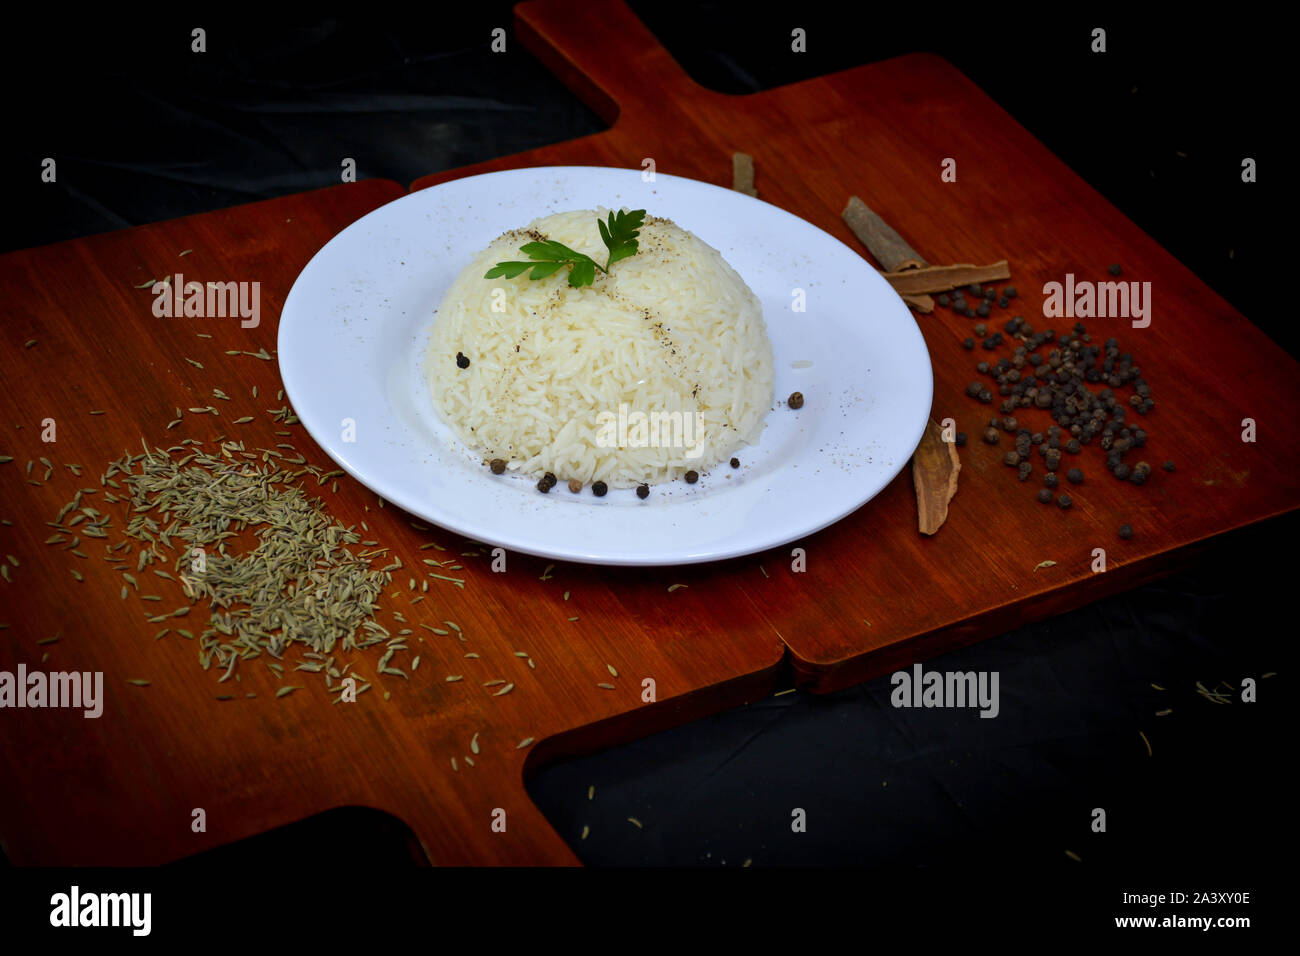 Arabic traditional food RICE. Middle Eastern plat. Stock Photo